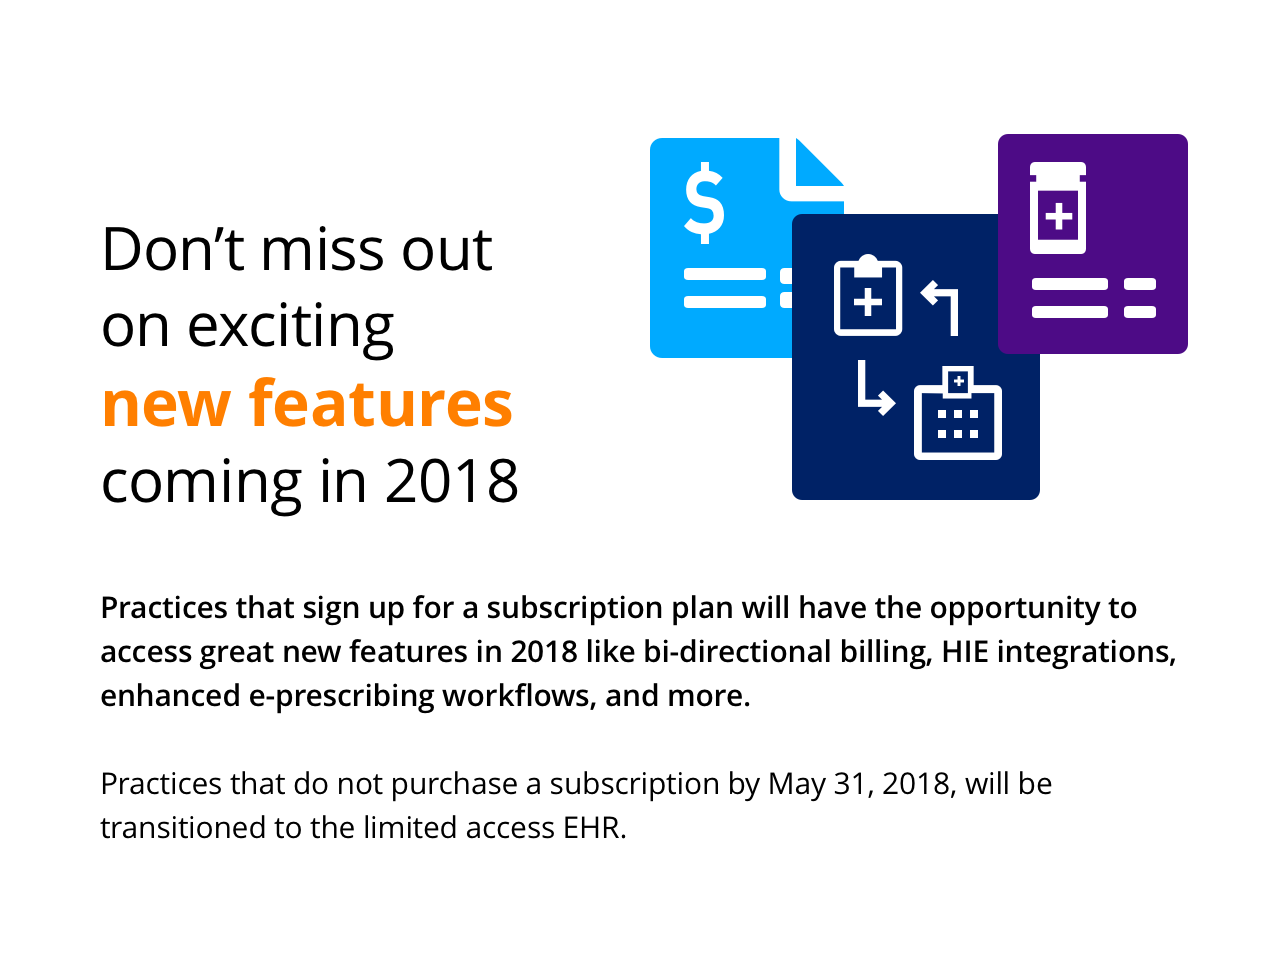 Practices that sign up for a subscription plan will have the opportunity to access great new features in 2018 like bi-directional billing, HIE integrations, enhanced e-prescribing workflows, and more.